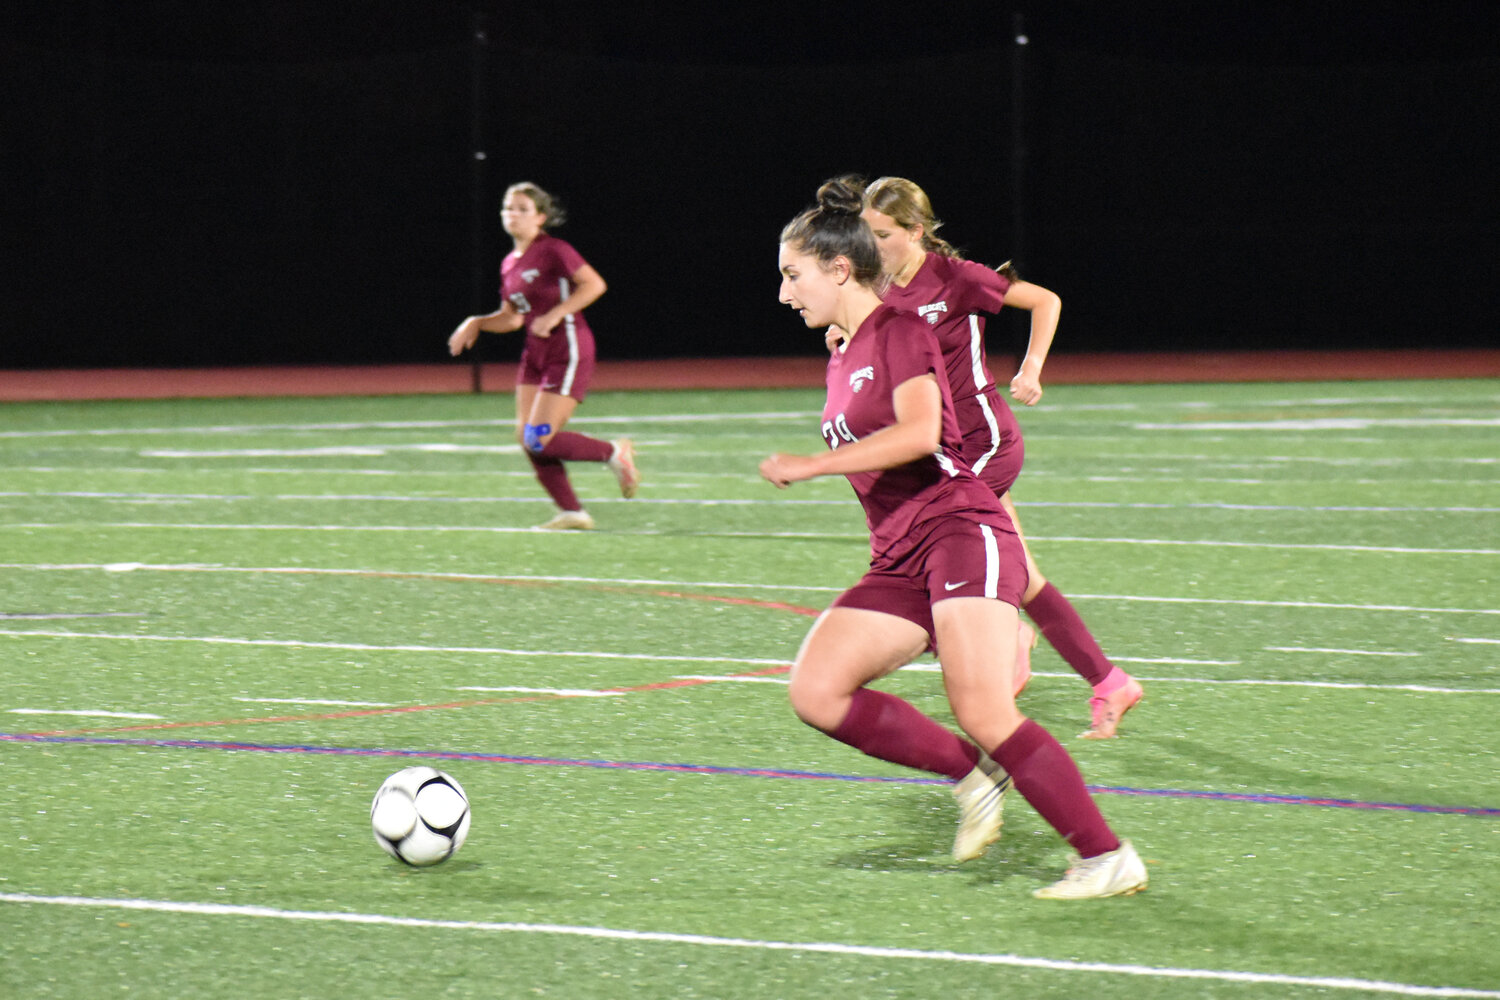 Rebecca Gashinsky used her fancy footwork to advance the Livingston Manor offense. She also added two goals in the Championship win.